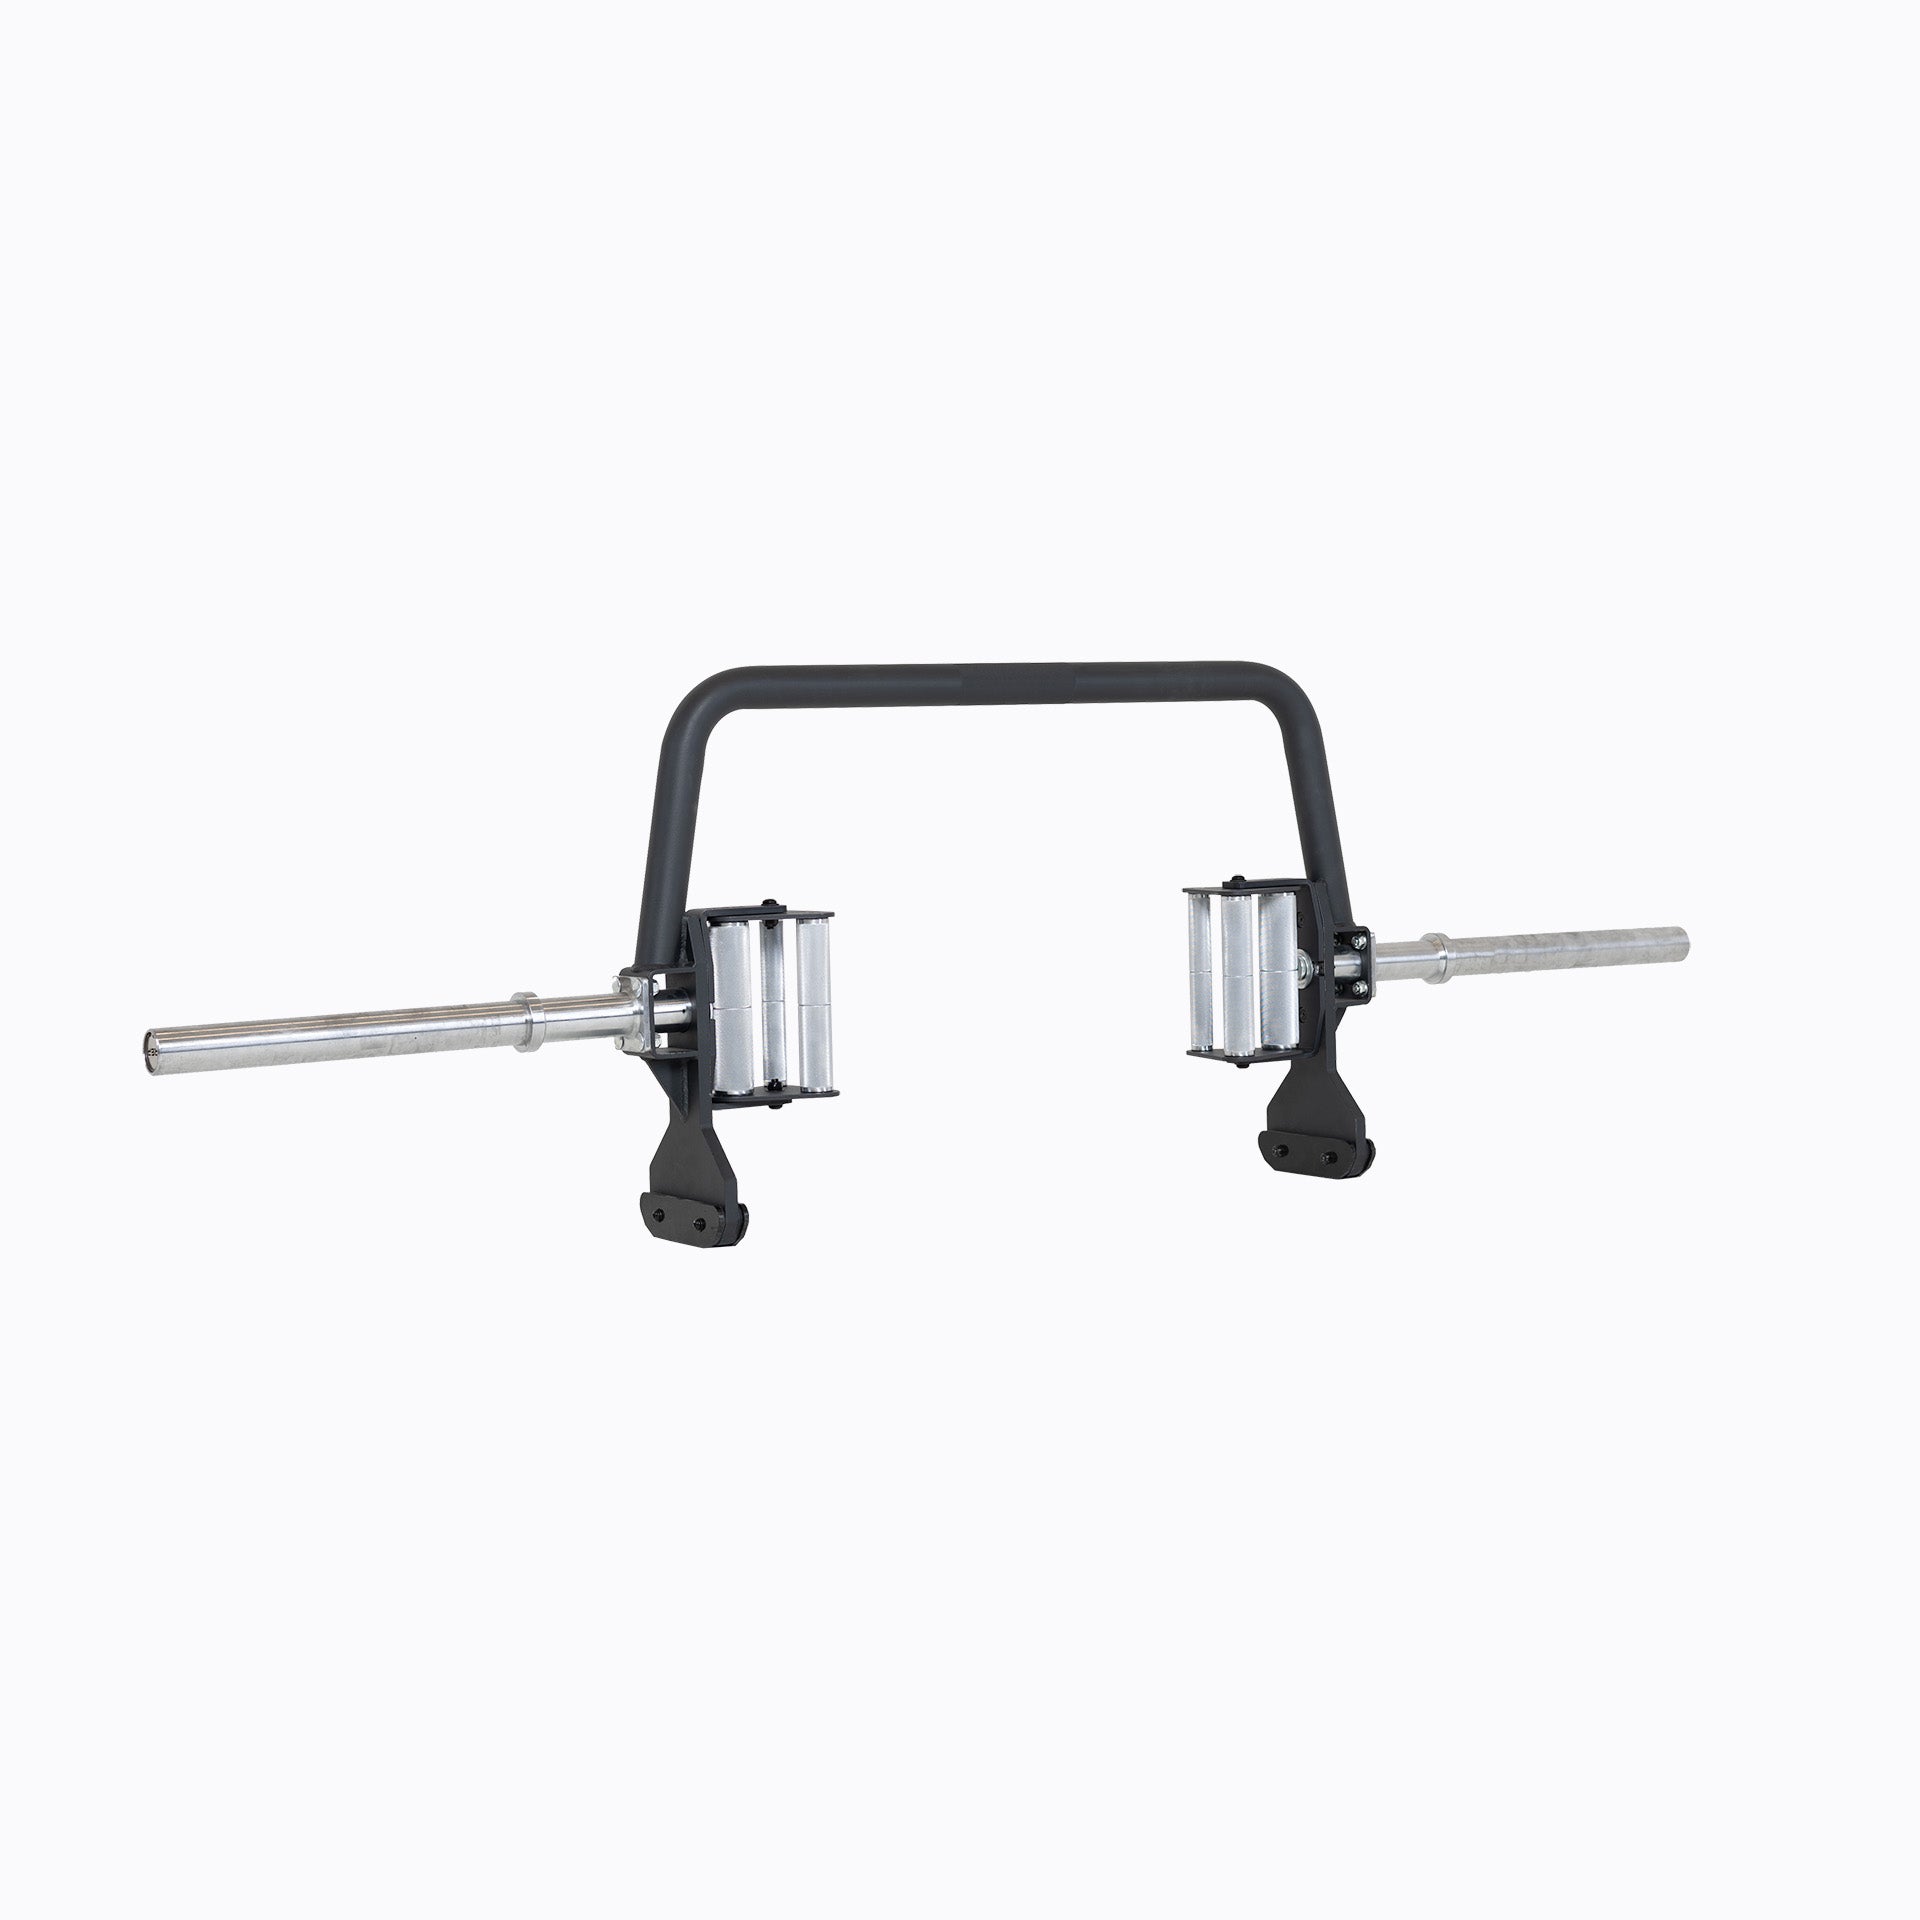 Open Trap Bar with rotating handles standing vertically on its integrated deadlift jack.